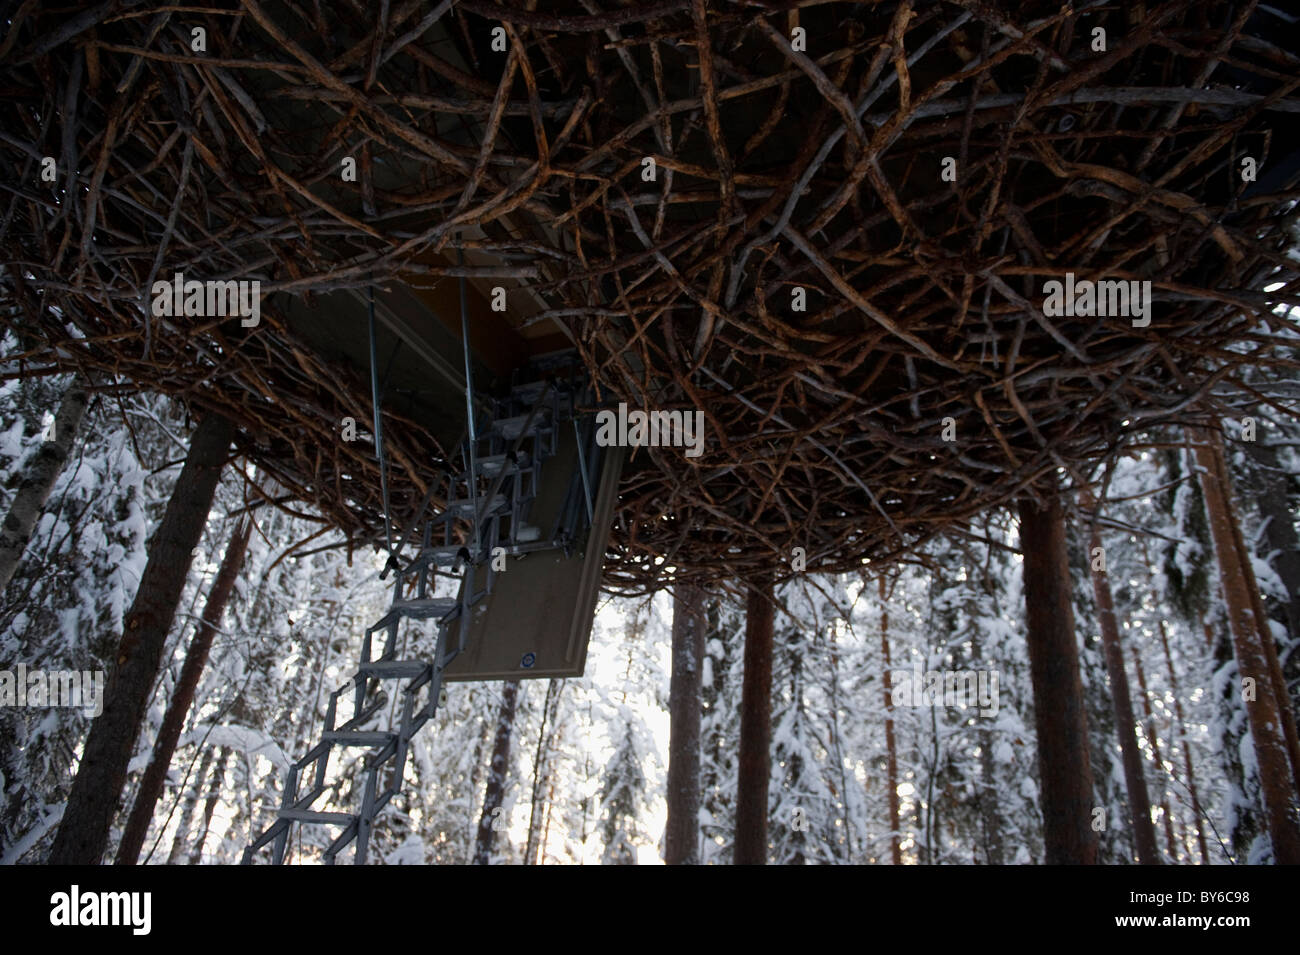 The treehotel, architecture designed rooms in trees Stock Photo